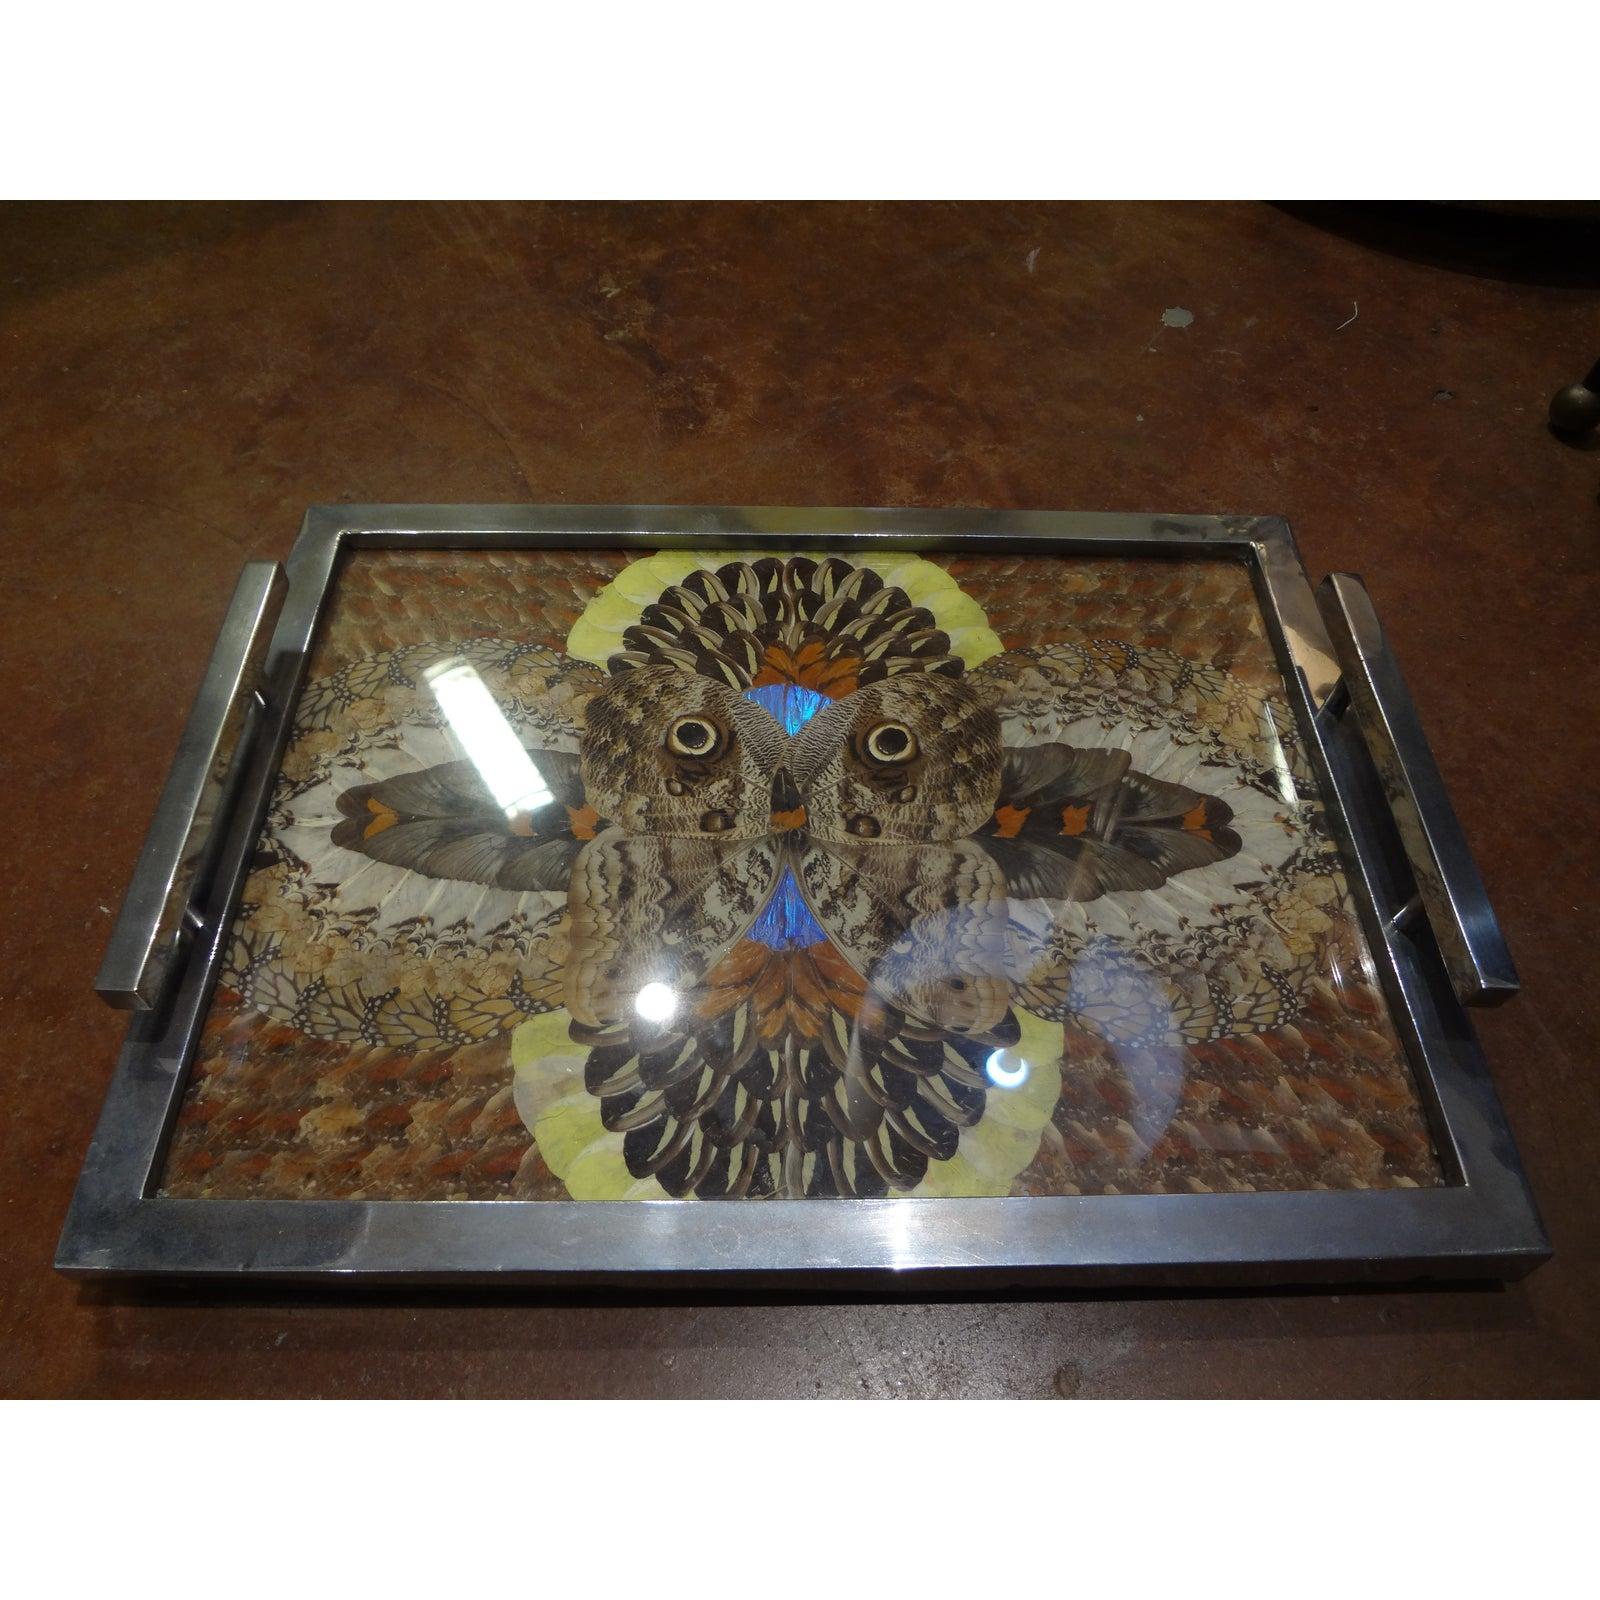 Stunning 1930s French Art Deco chrome tray with handles adorned with butterfly wings which were artistically placed under glass. A great conversation piece. Perfect for serving drinks, as a cocktail table accessory, used as a vanity tray or in a